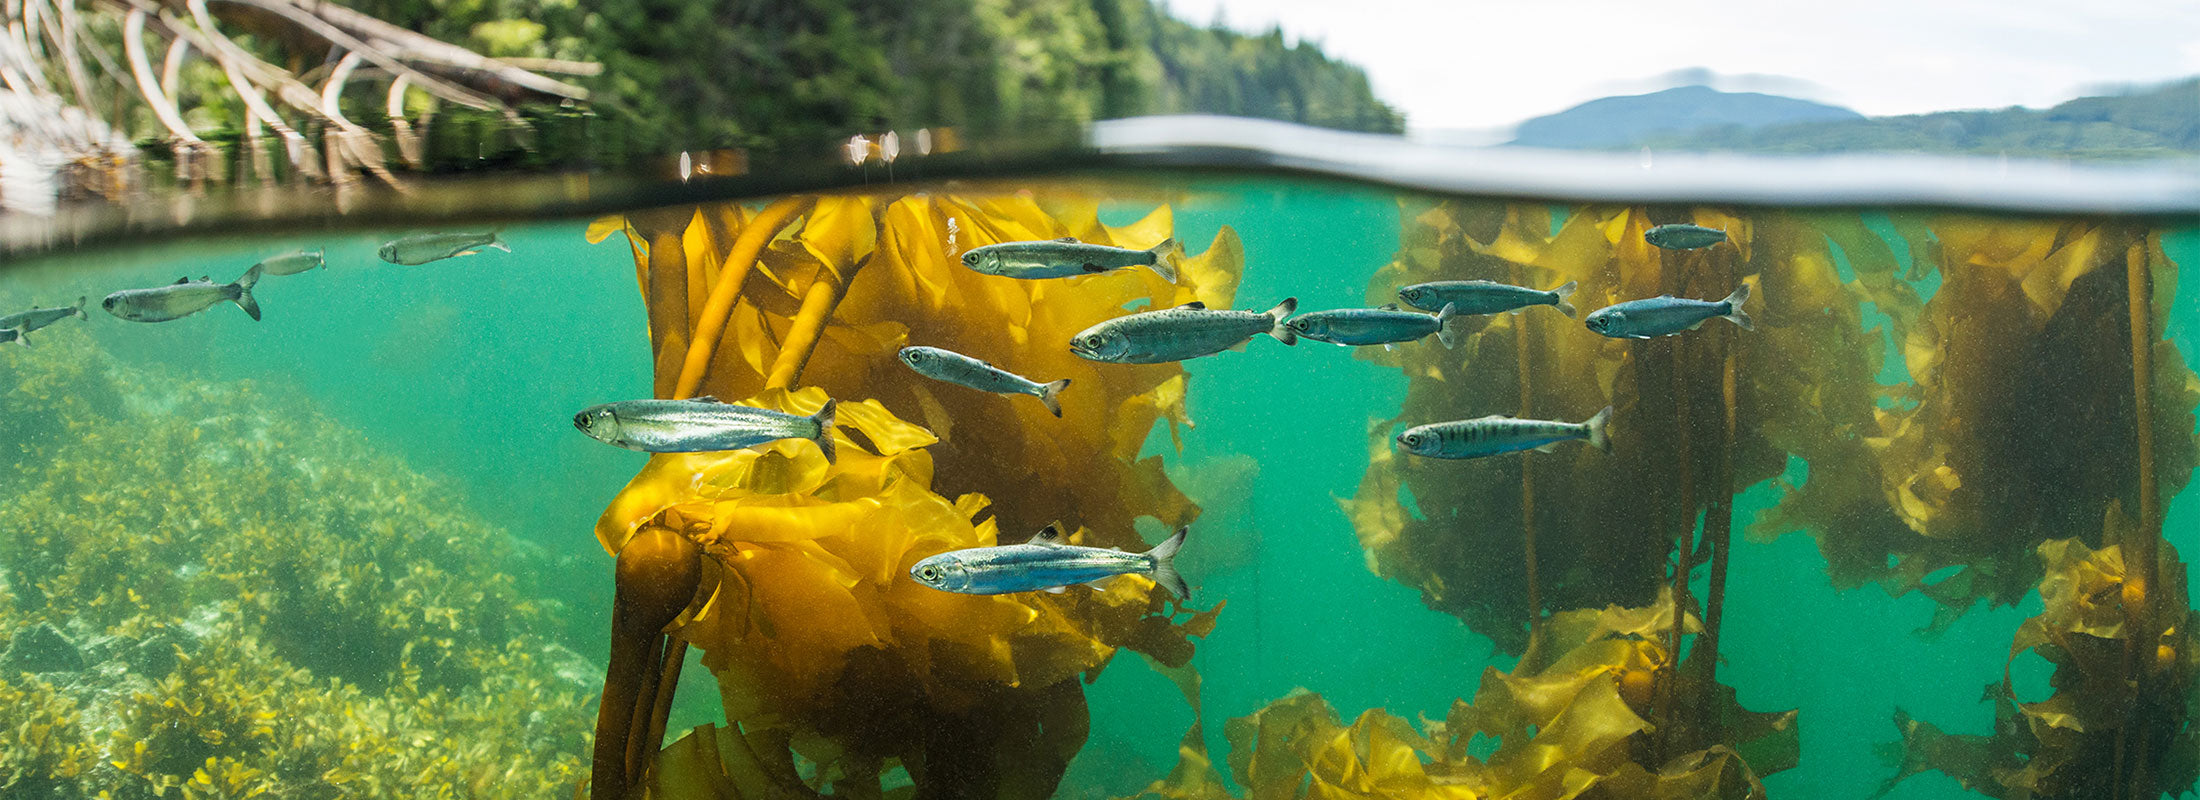 Image shows the waterline, with trees and riverbank, and underwater view of young salmon swimming among kelp